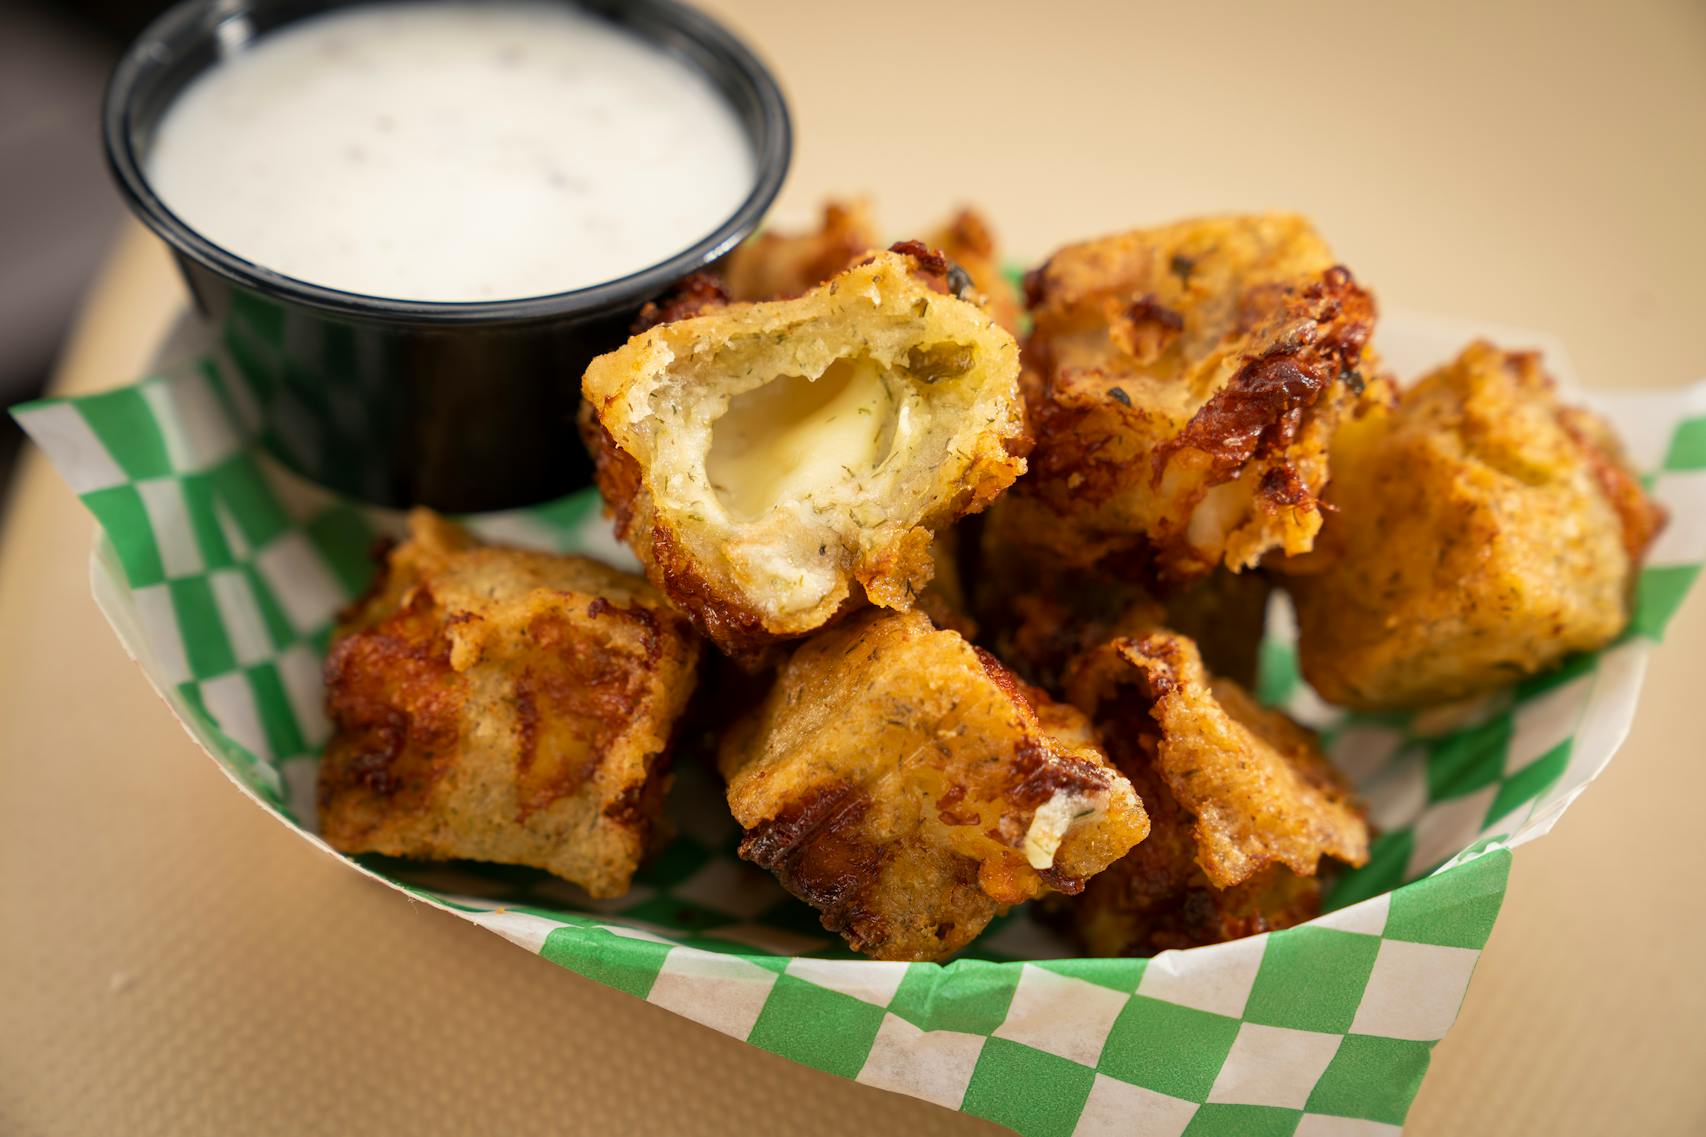 Dill-iscious Grilled Cheese Bites from O’Gara’s at the Fair. The new foods of the 2023 Minnesota State Fair photographed on the first day of the fair in Falcon Heights, Minn. on Tuesday, Aug. 8, 2023. ] LEILA NAVIDI • leila.navidi@startribune.com